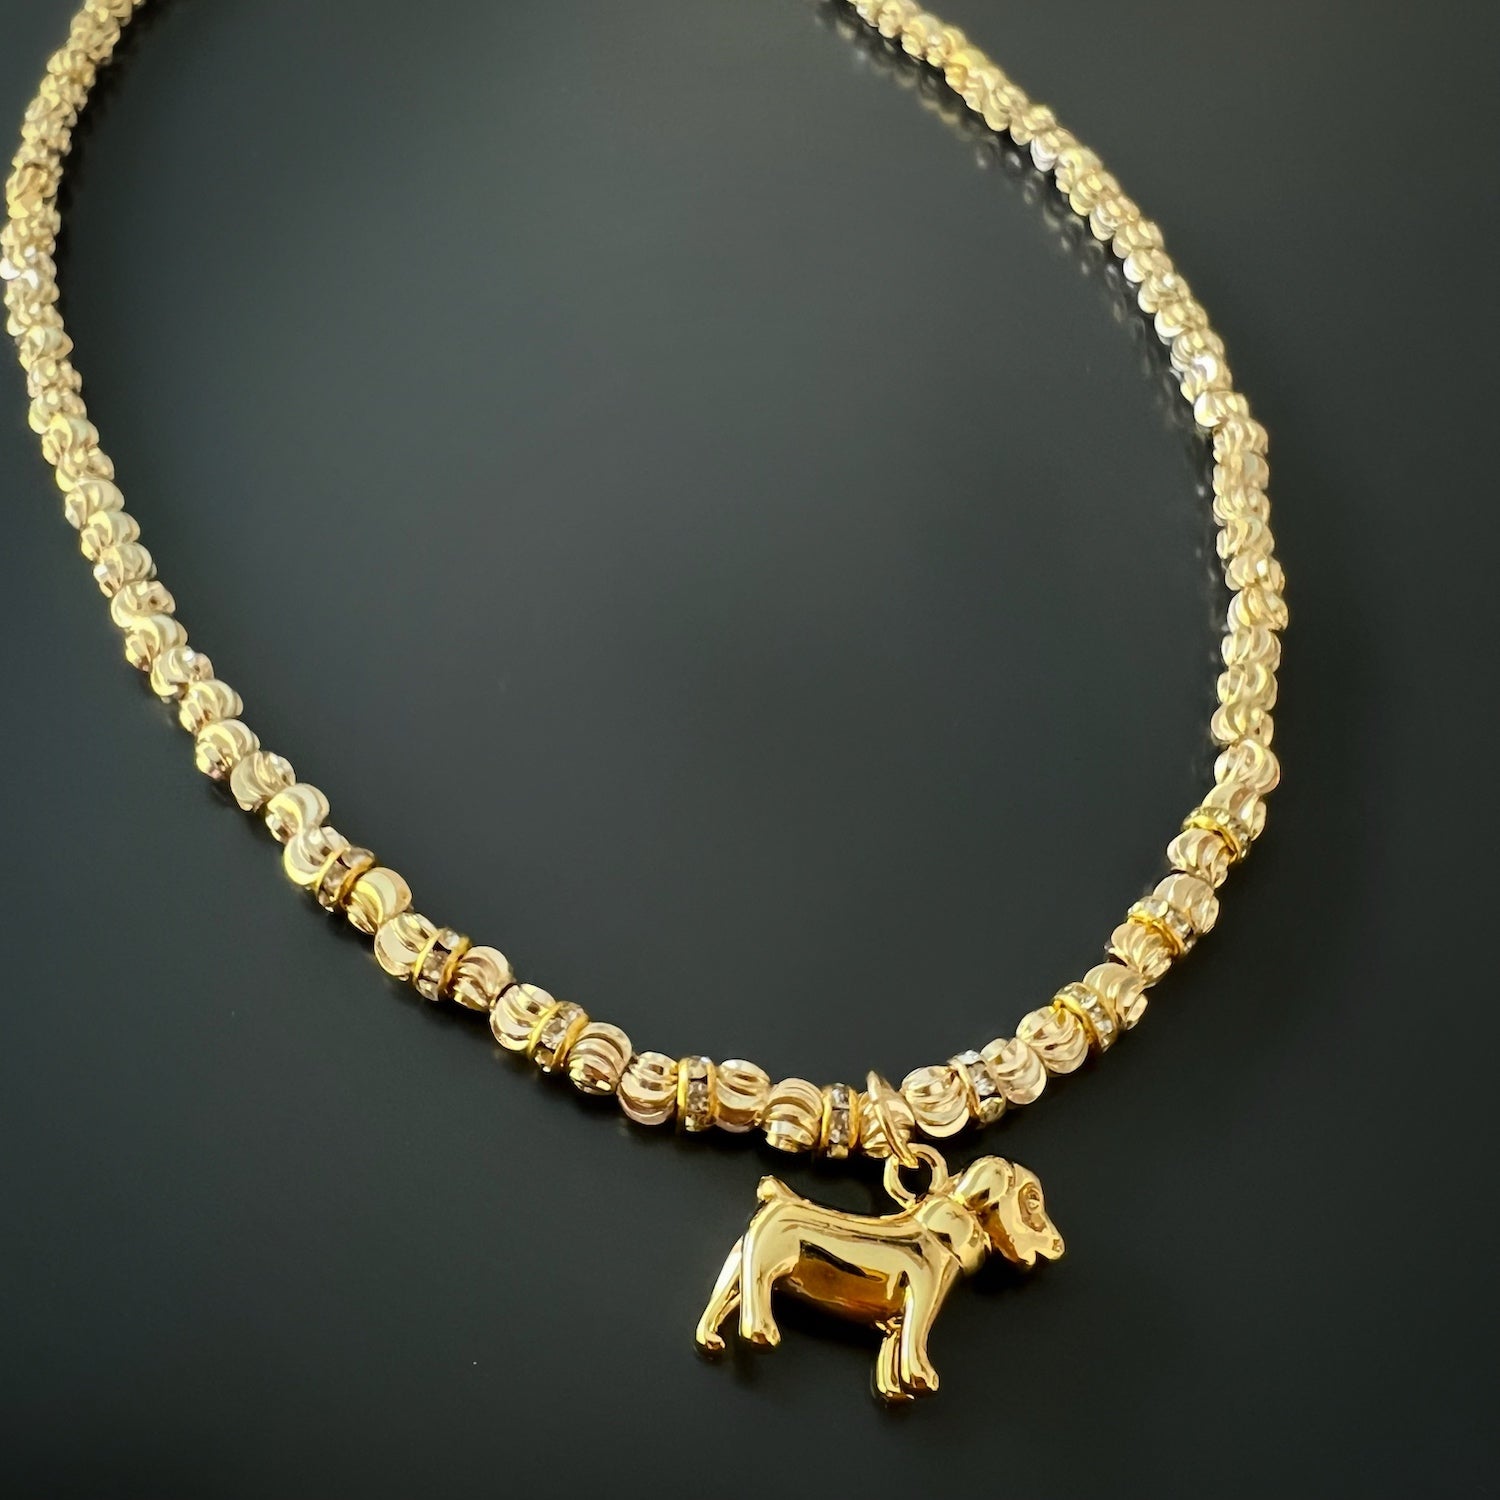 the Happy Dog Gold Necklace, capturing the lovely arrangement of the dog pendant, chain, and extender. The 18K gold plated charm gleams under the light, creating a delightful and whimsical accessory.